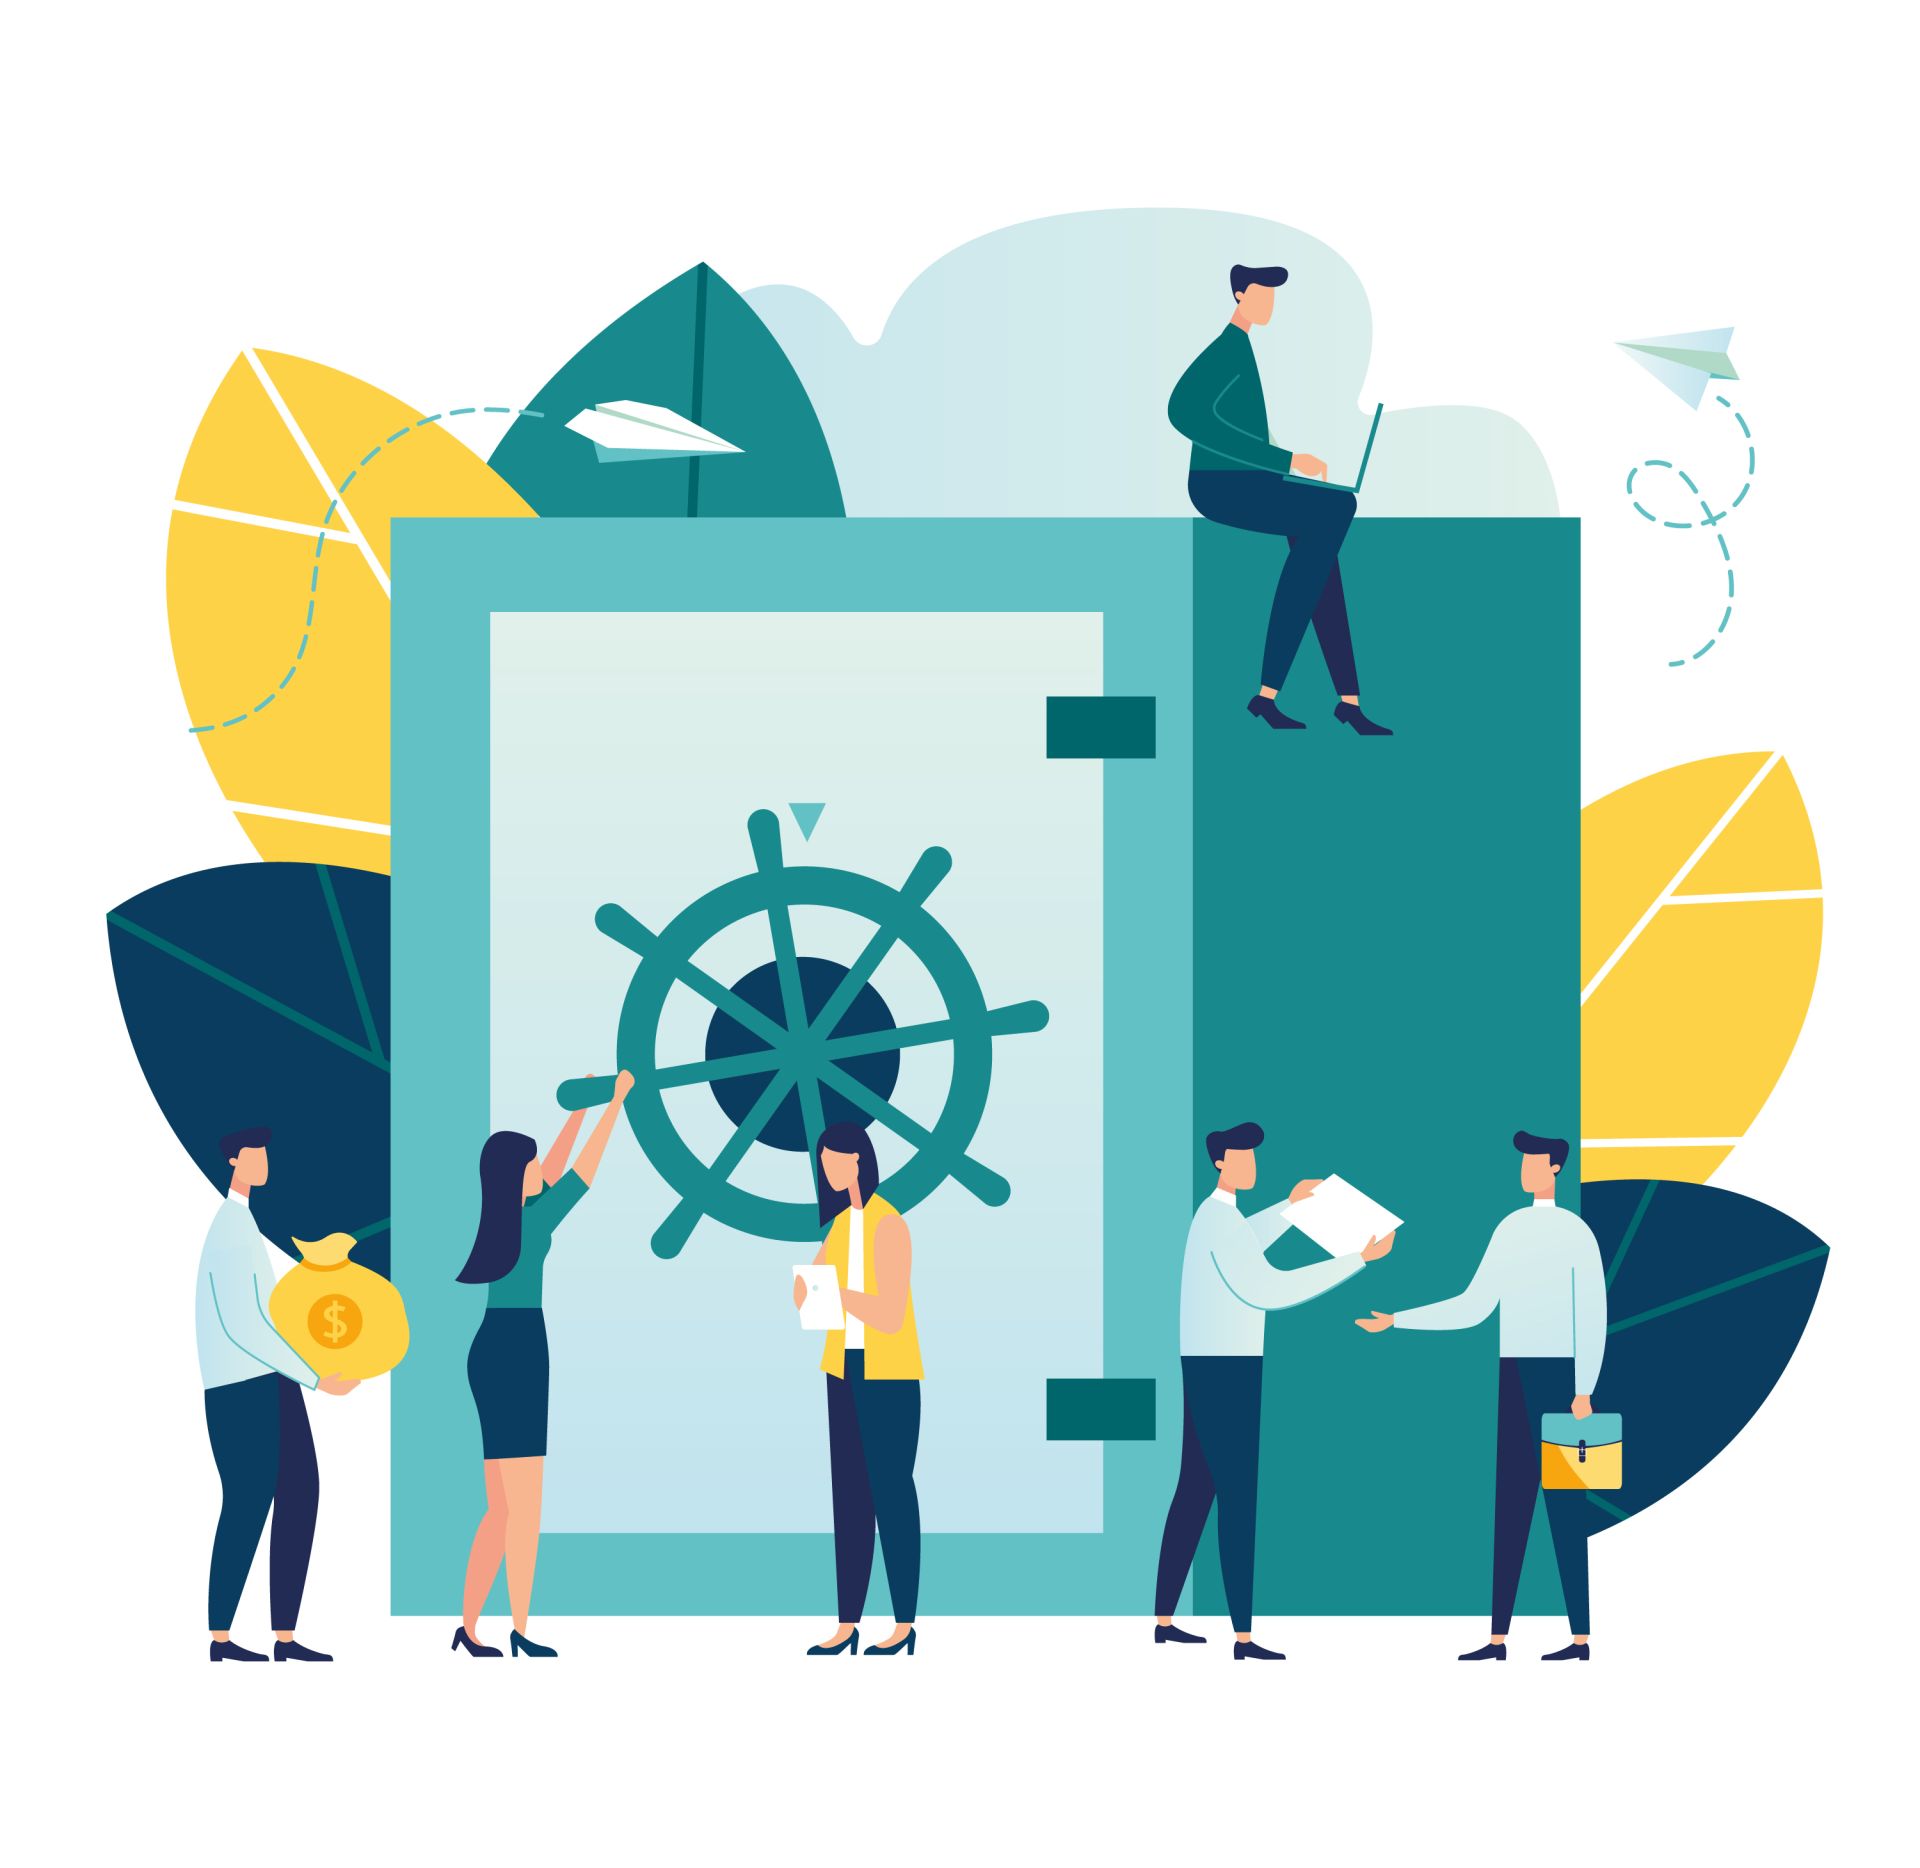 An abstract illustration of a group of professionals in business attire collaborating around a large safe door with a ship's wheel, symbolizing maritime finance or management.